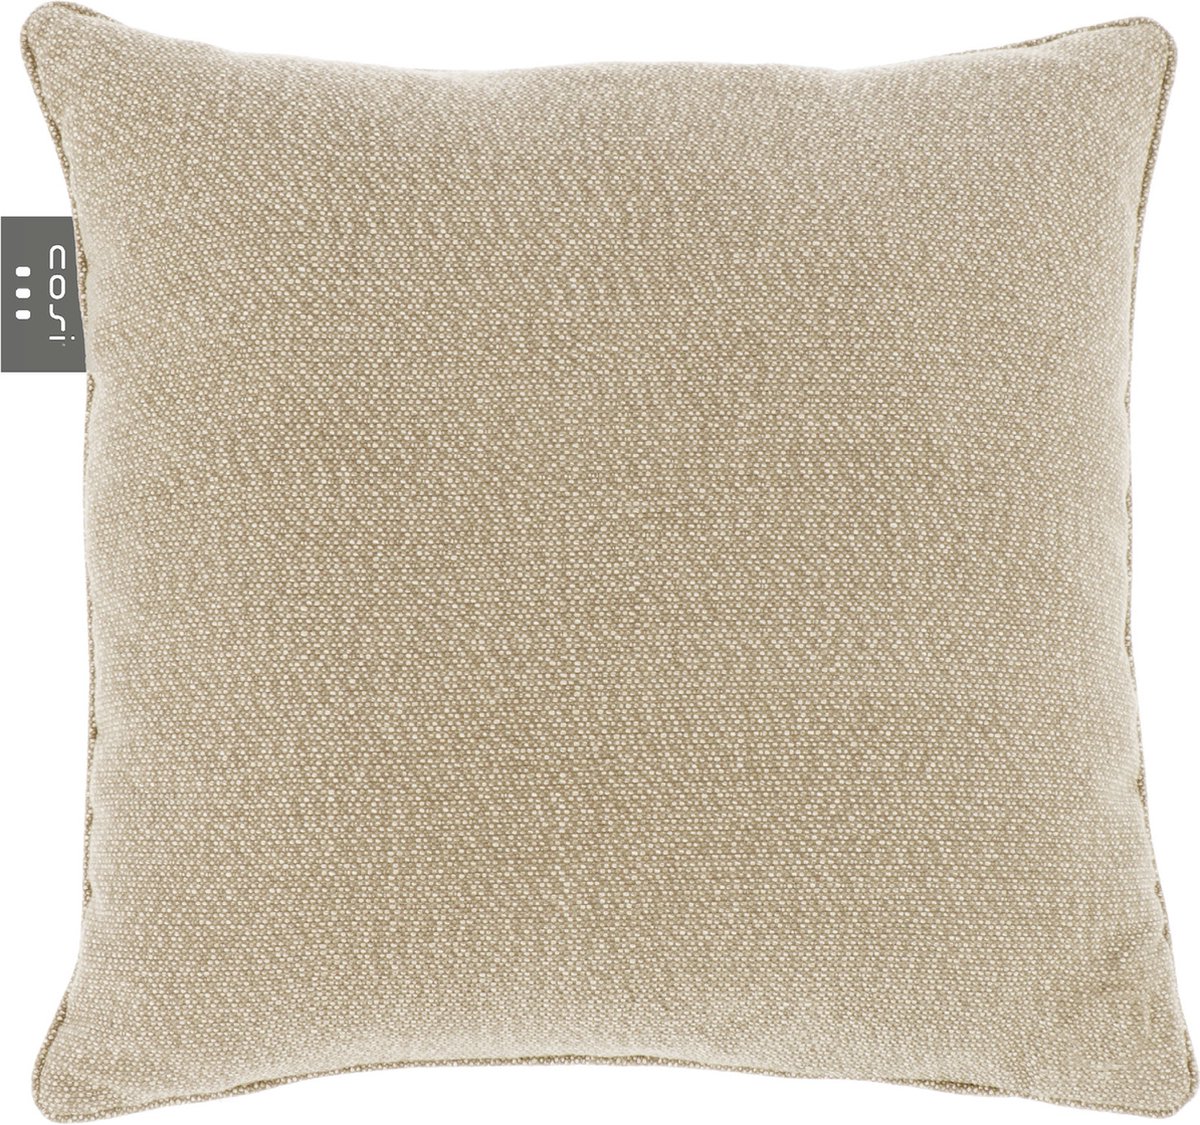 Cosipillow heating cushion Knitted natural 50x50 cm